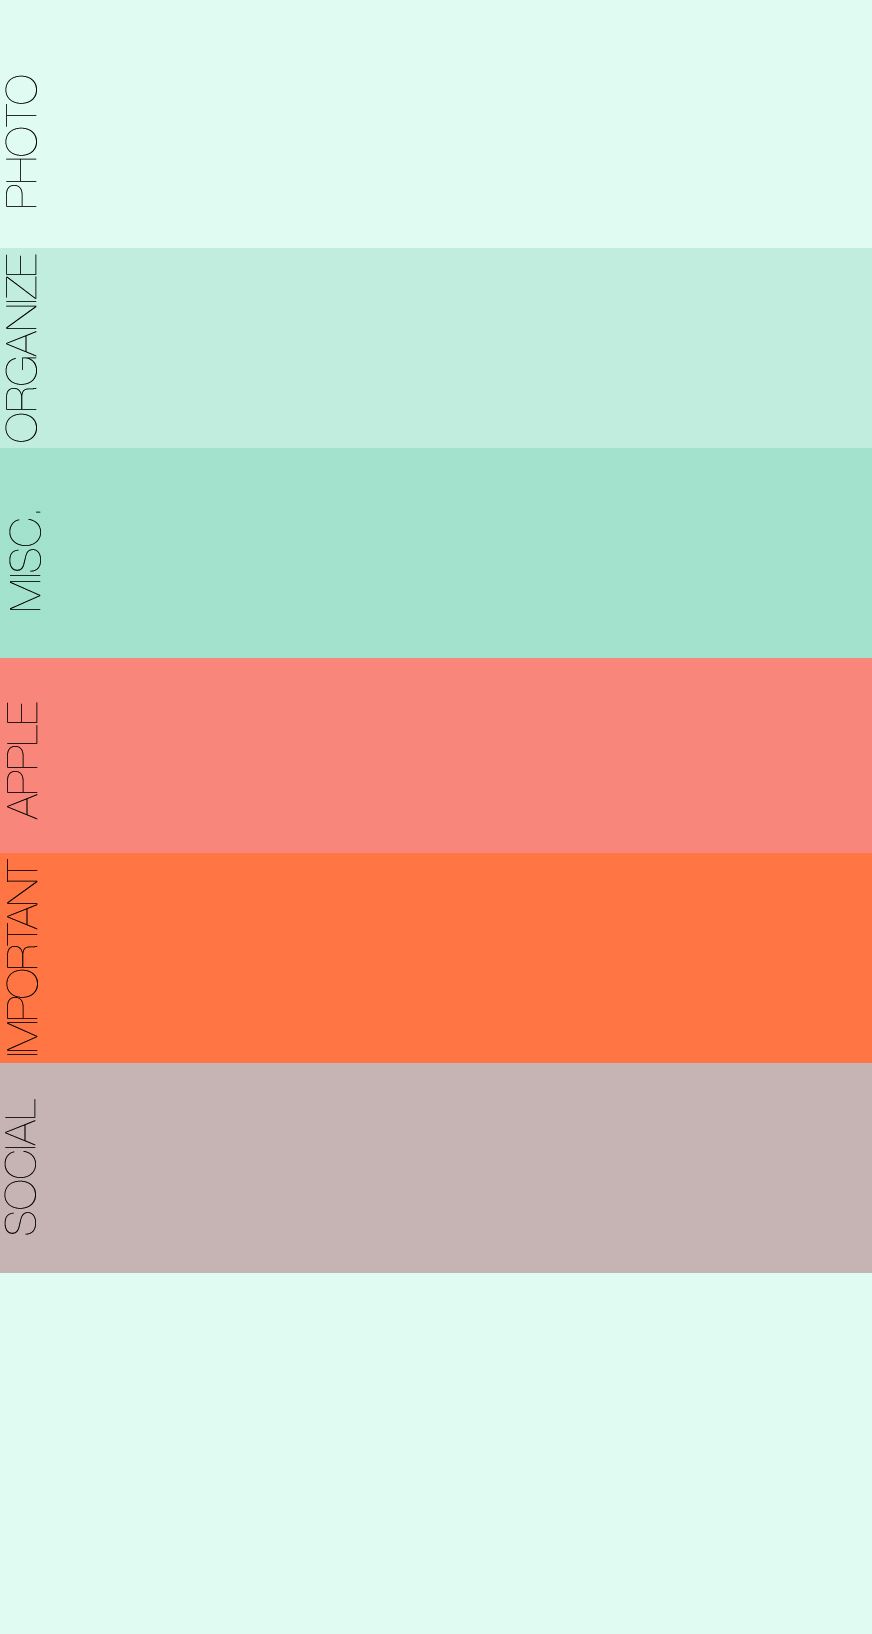 iphone 5s home screen wallpaper,green,orange,text,yellow,turquoise